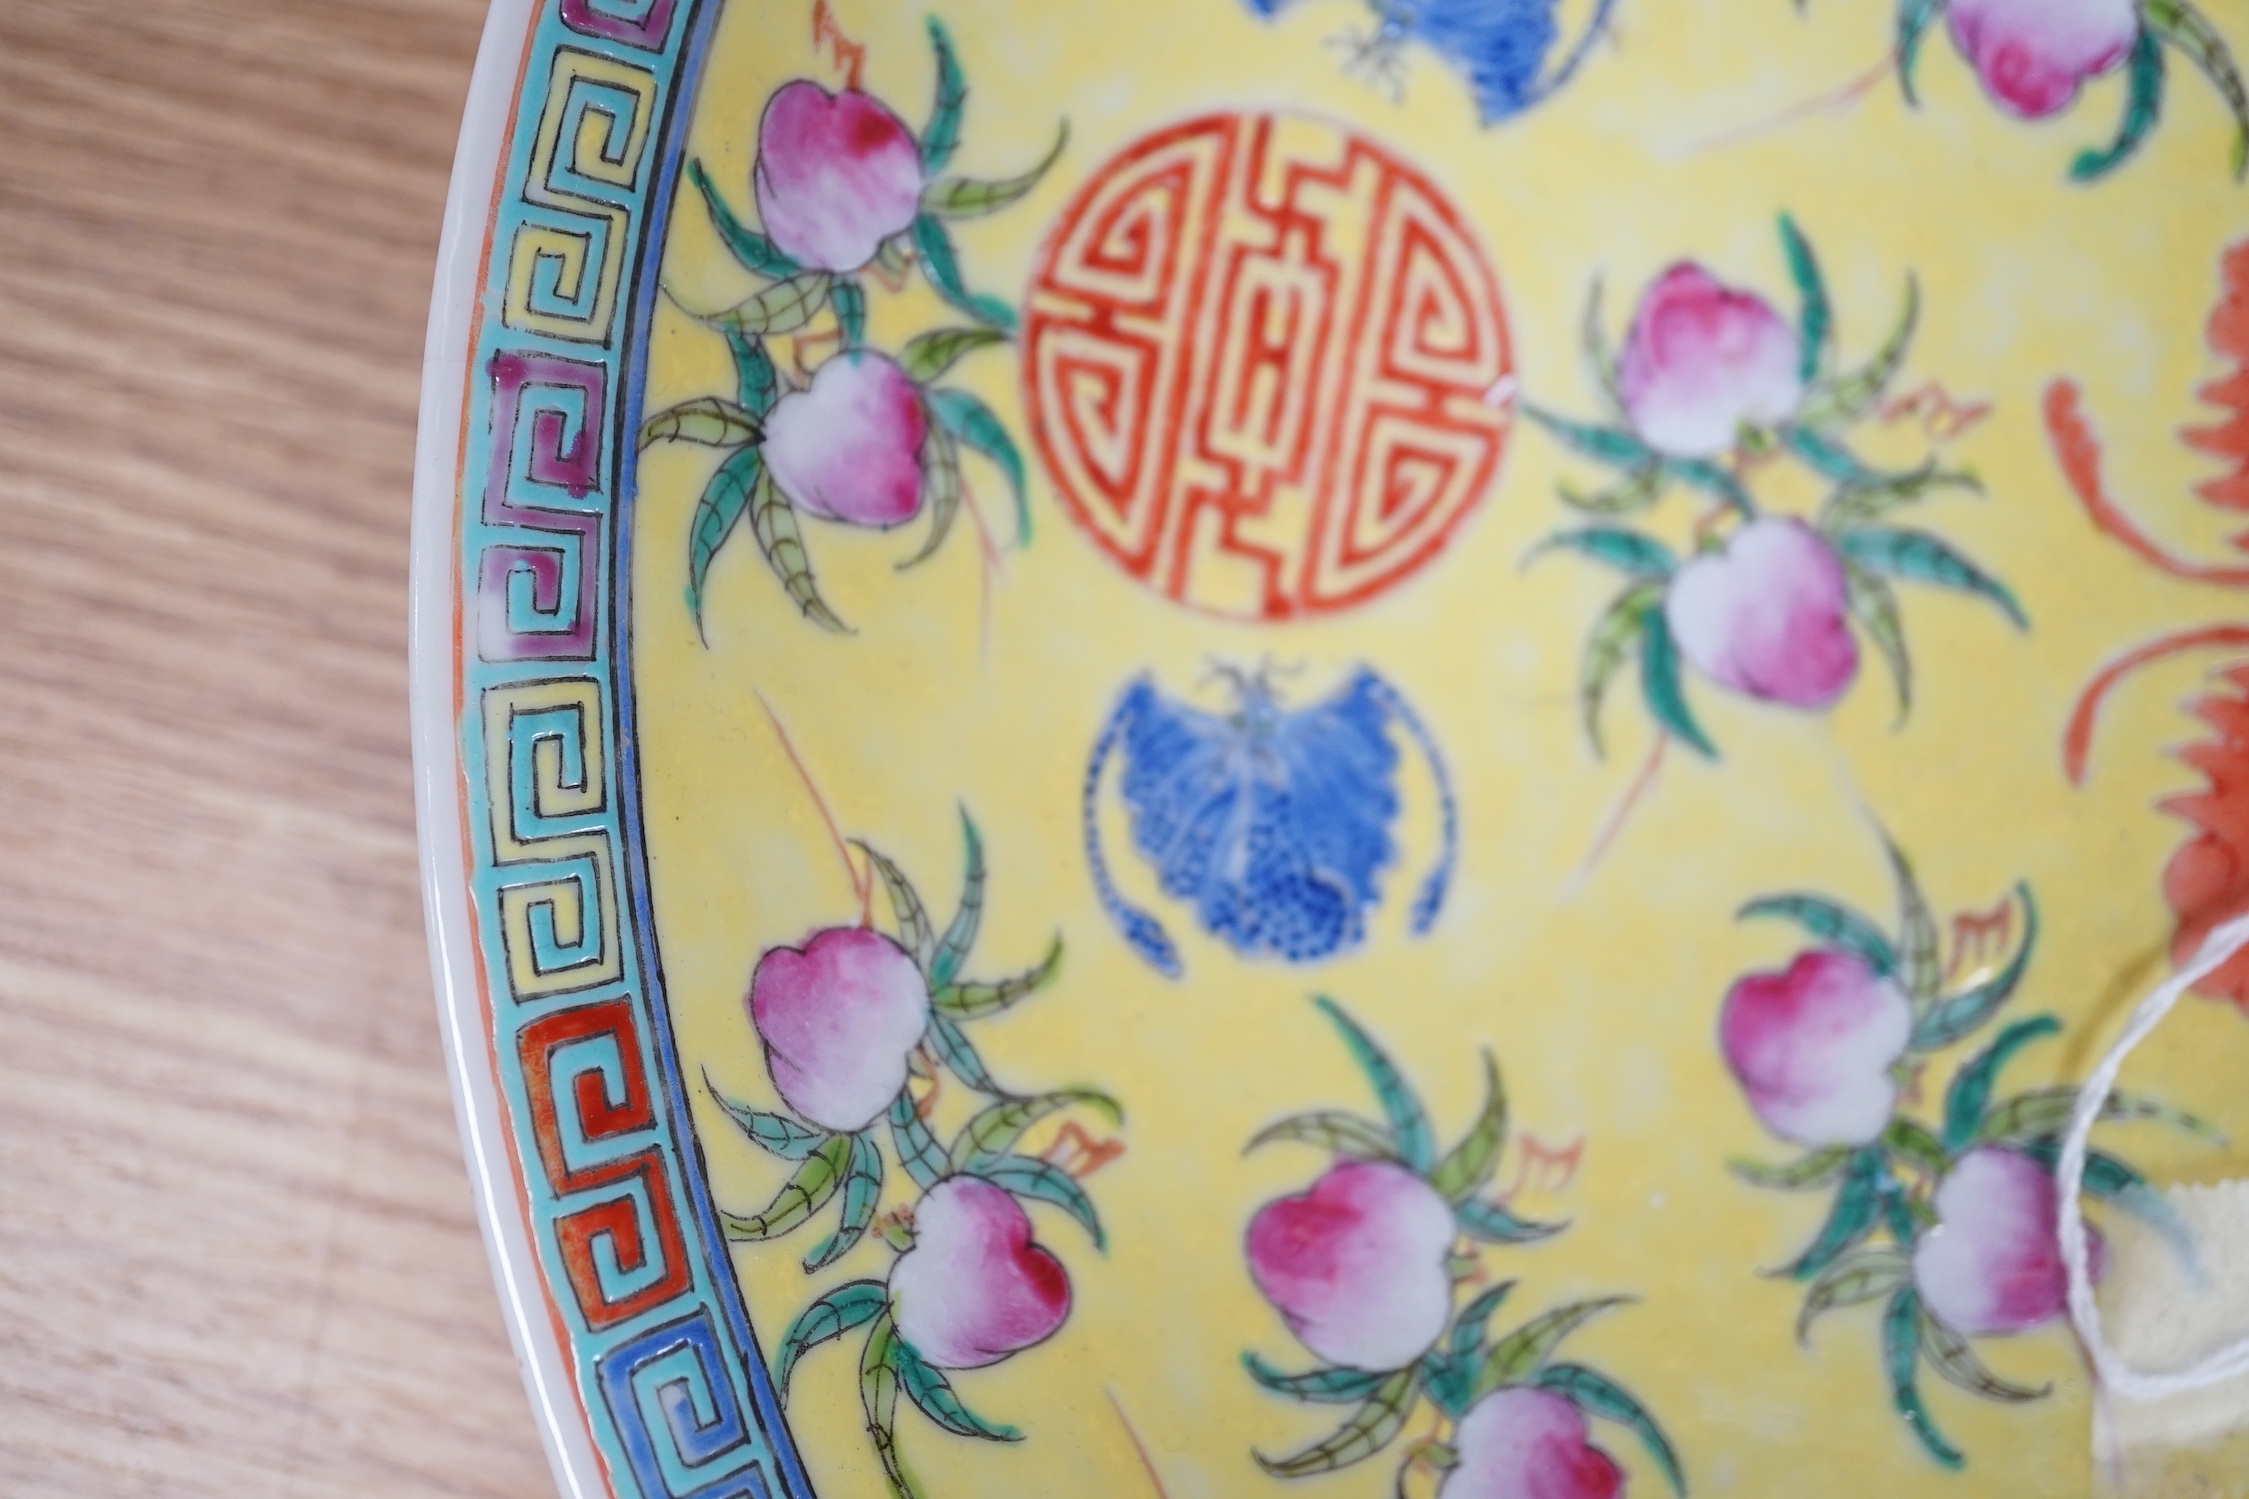 A Chinese yellow ground ‘peaches and bats’ dish, Republic period, 32.7cm diameter, hairline crack to rim